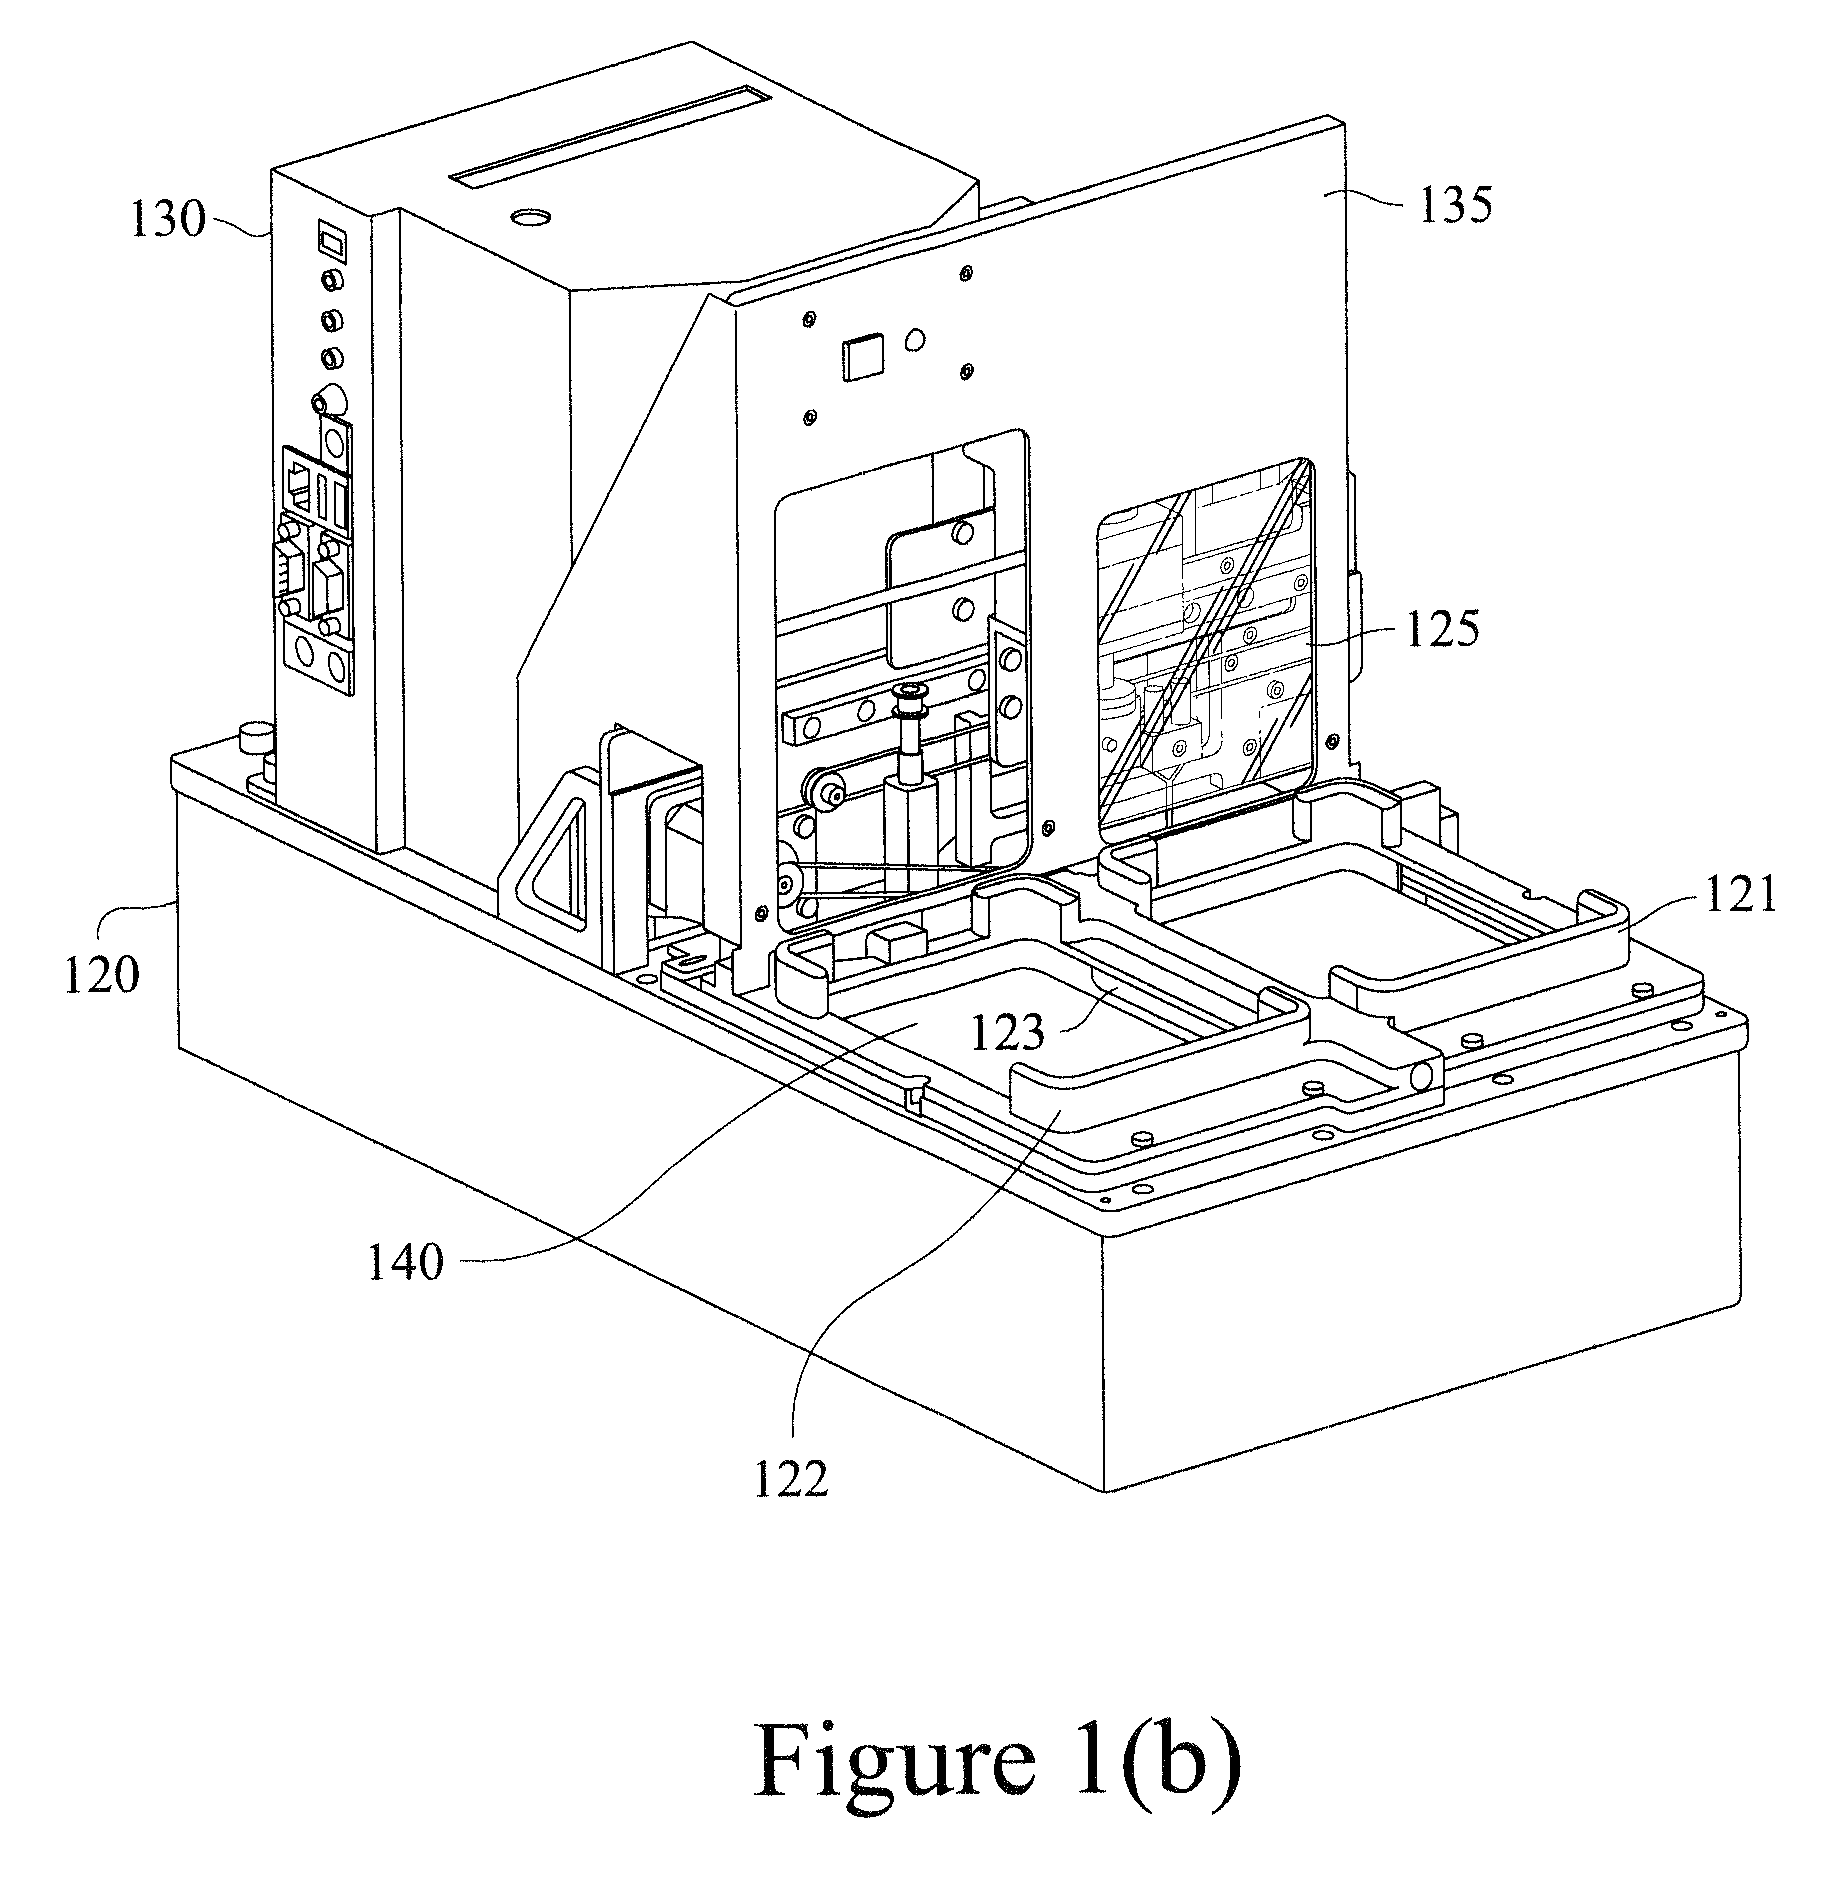 Replaceable detection module and an apparatus for conducting luminescence assays